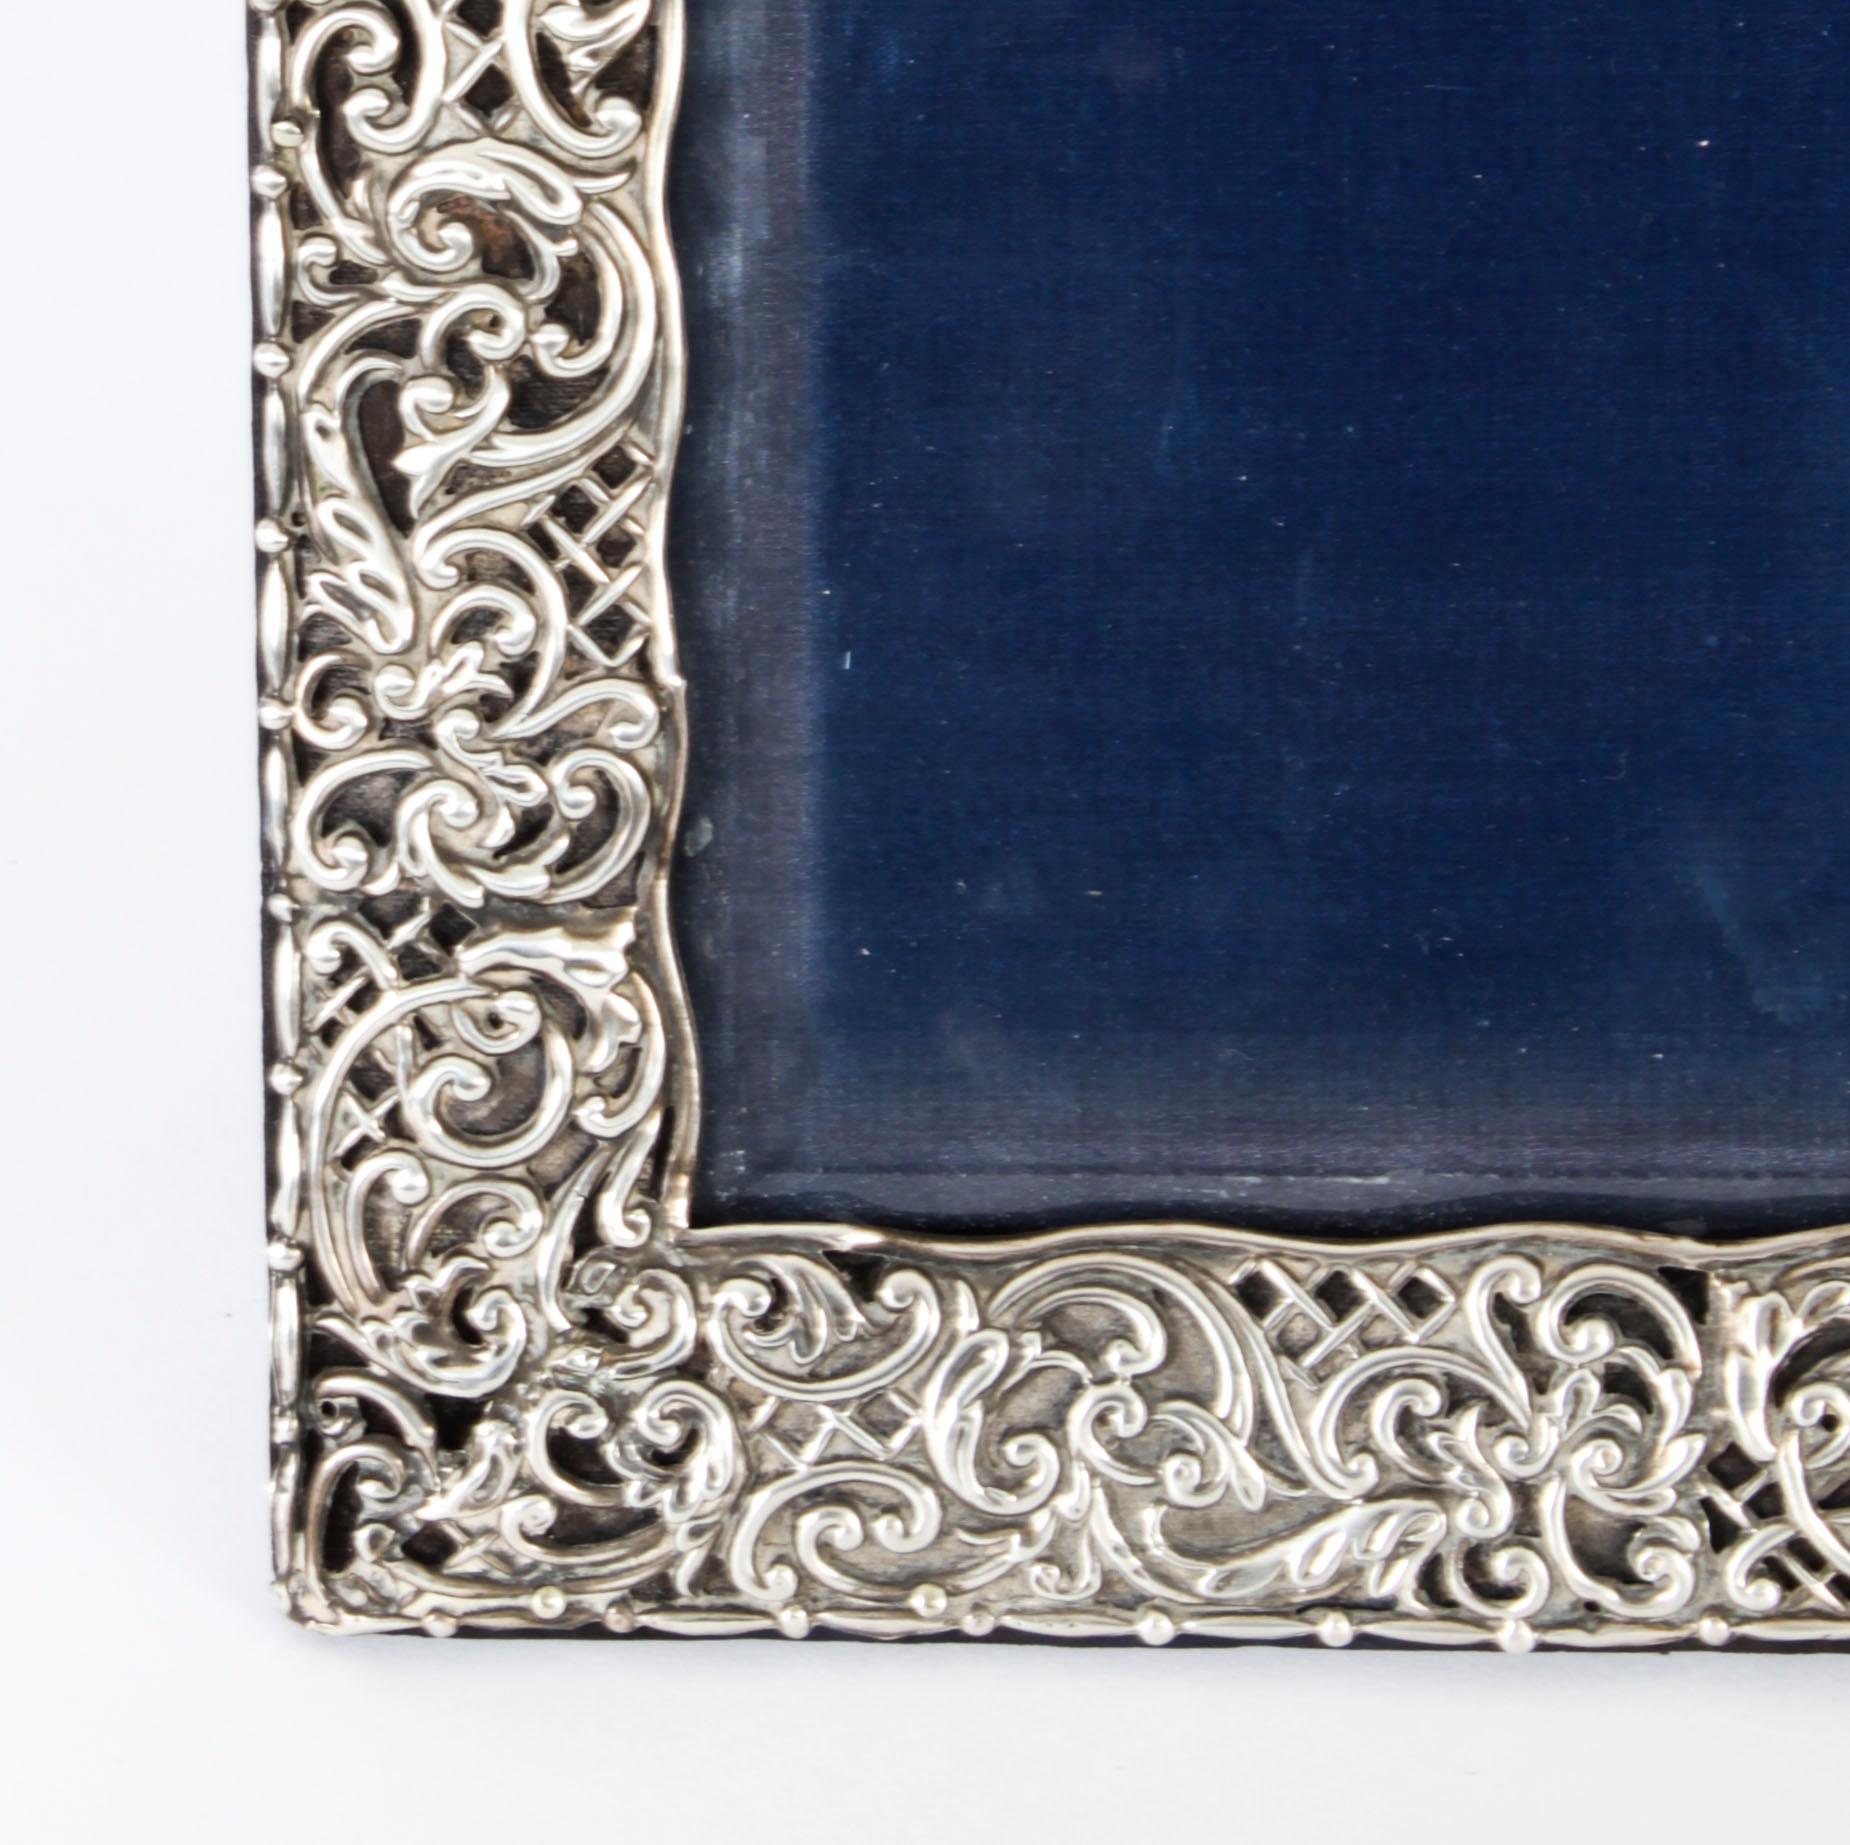 Early 20th Century Antique Sterling Silver Photo Frame by Henry Matthews 1902